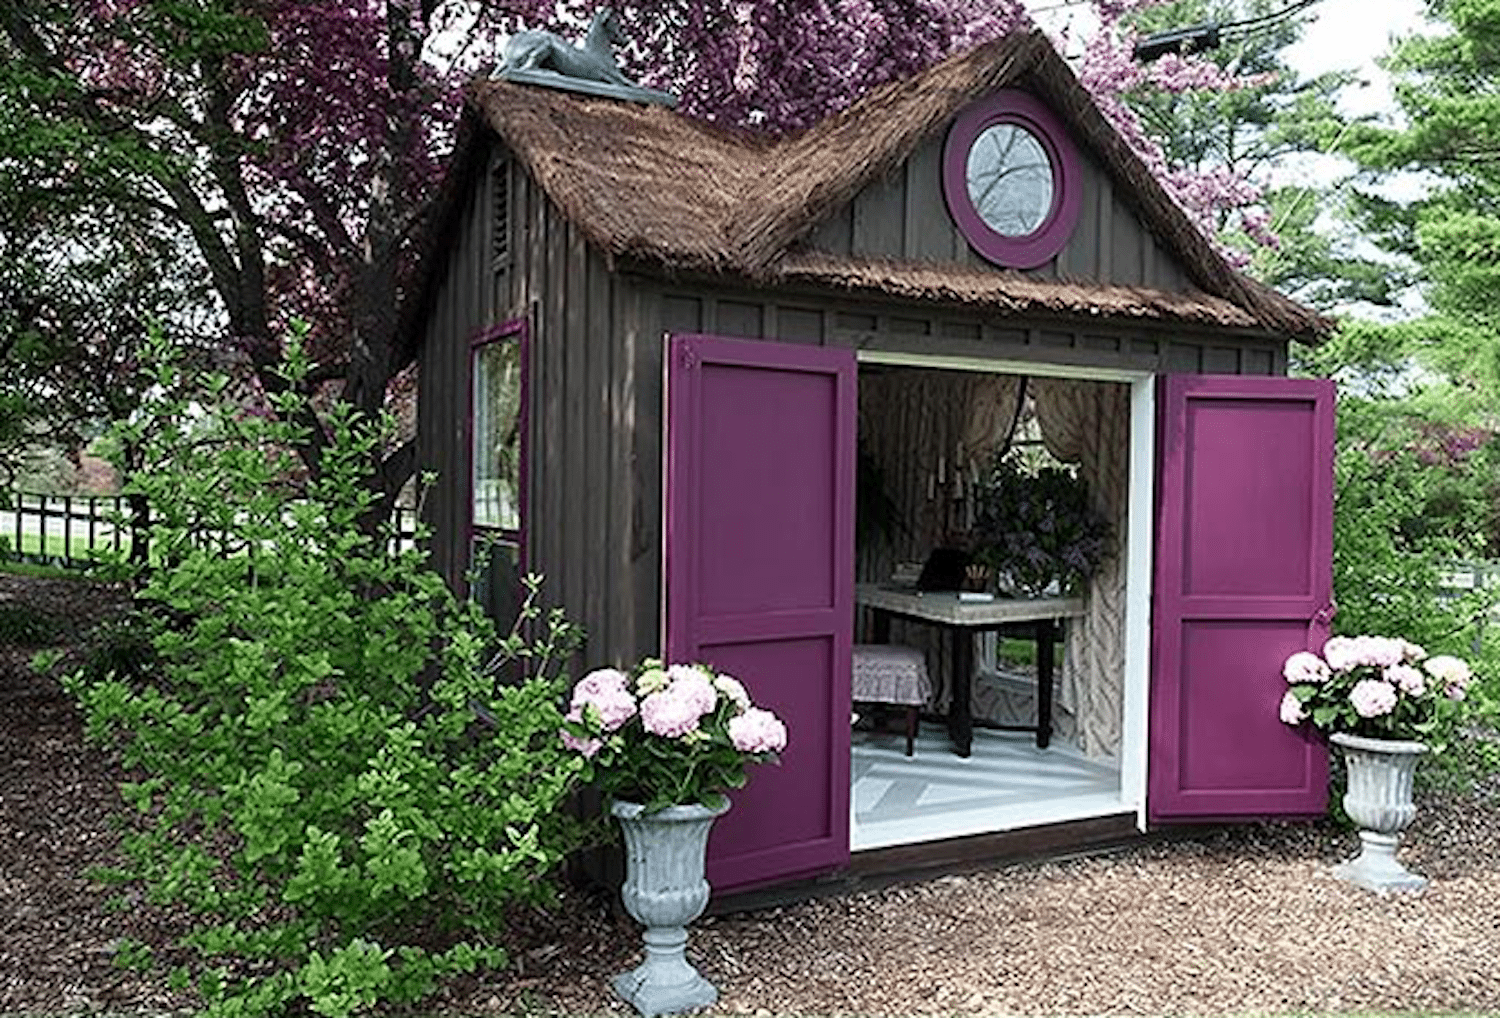 'She Sheds' Are The New 'Man Caves' For Women - Simplemost